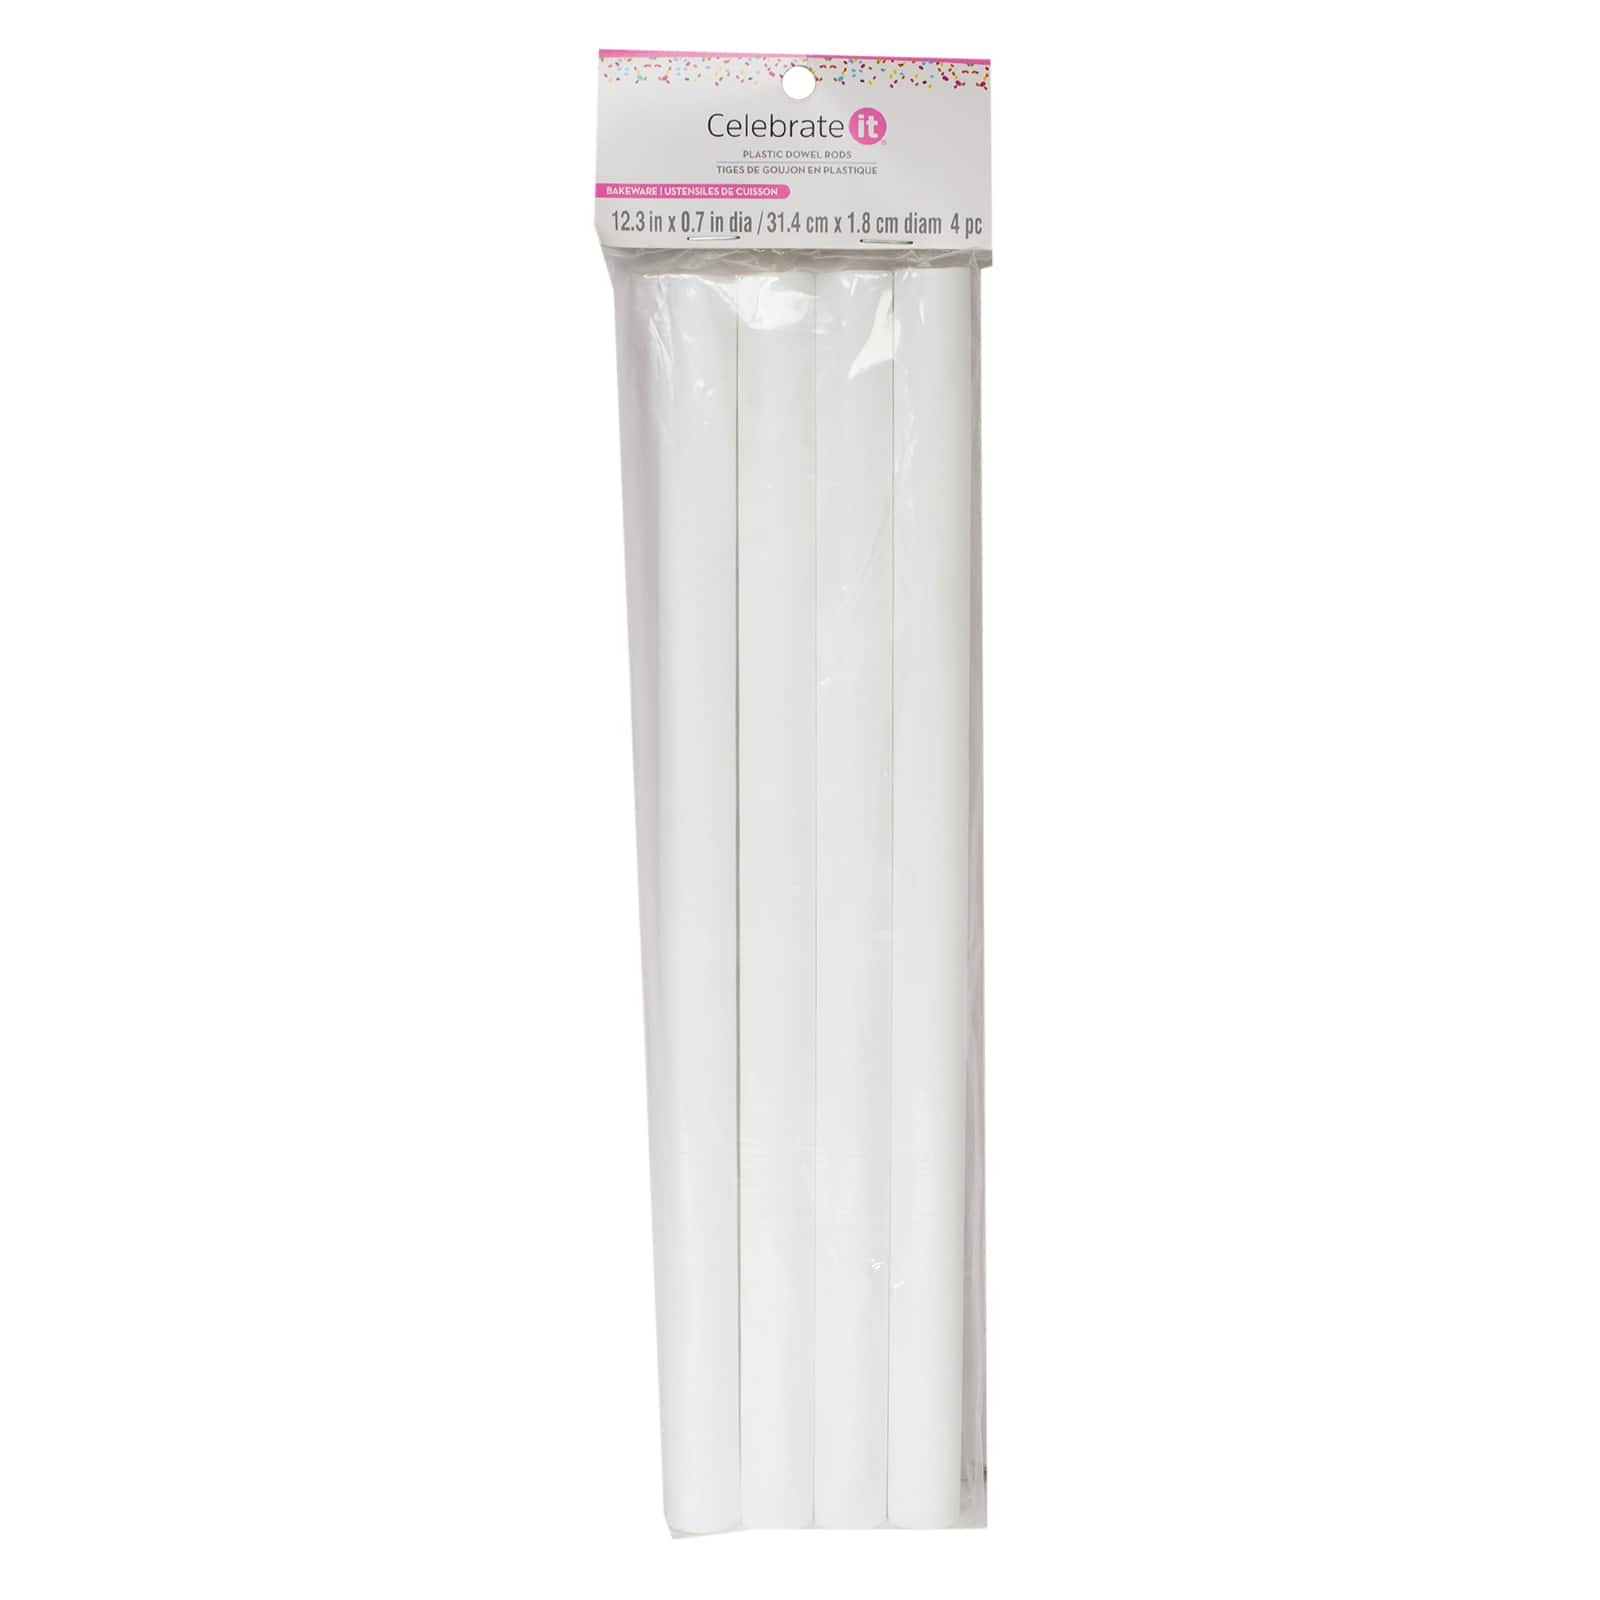 Plastic White Dowel Rods for Tiered Cake Construction, (30 cm x 1